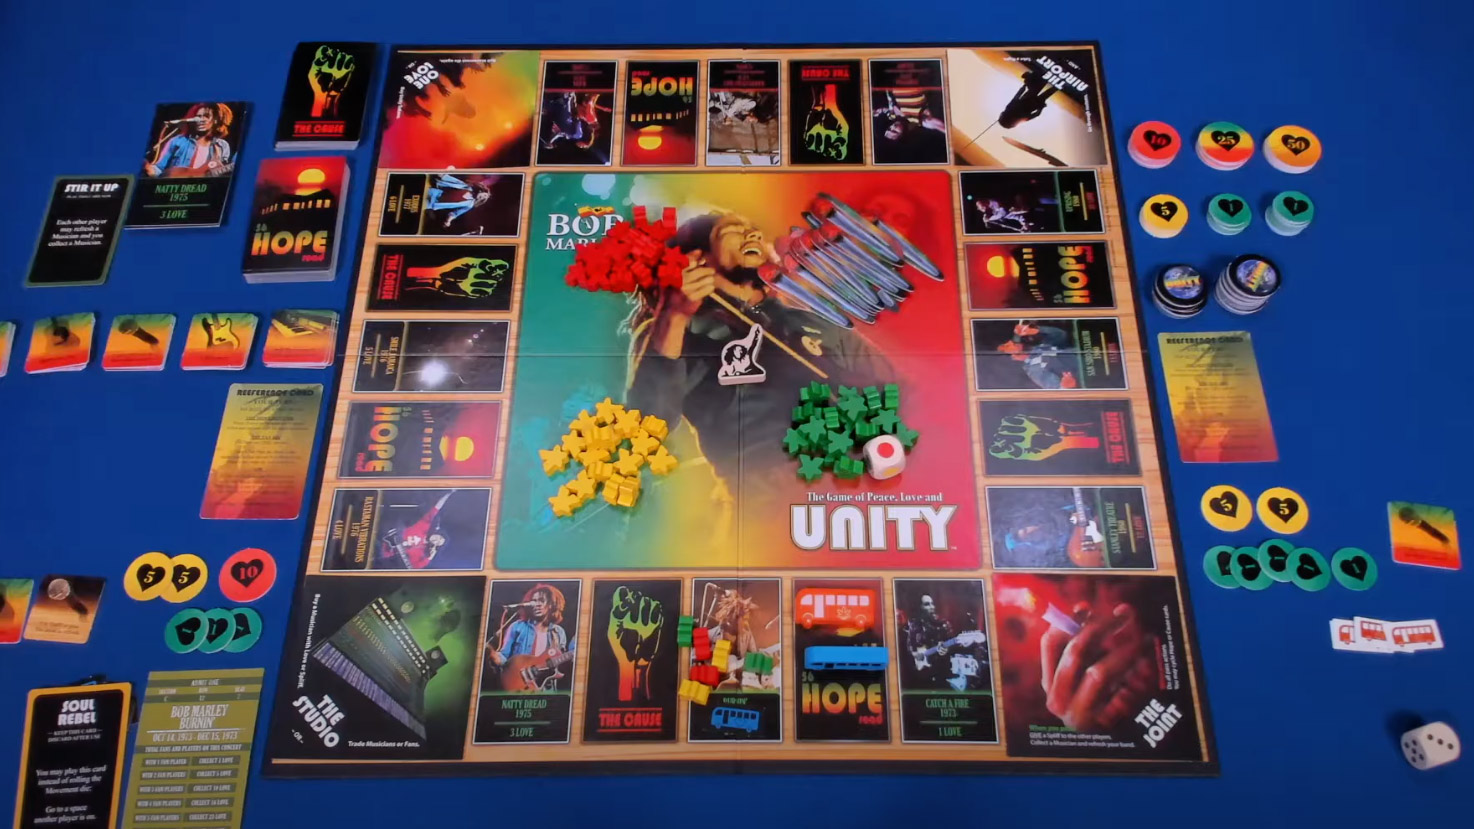 How To Play 'Bob Marley - Unity' Board Game [12/3/2020]